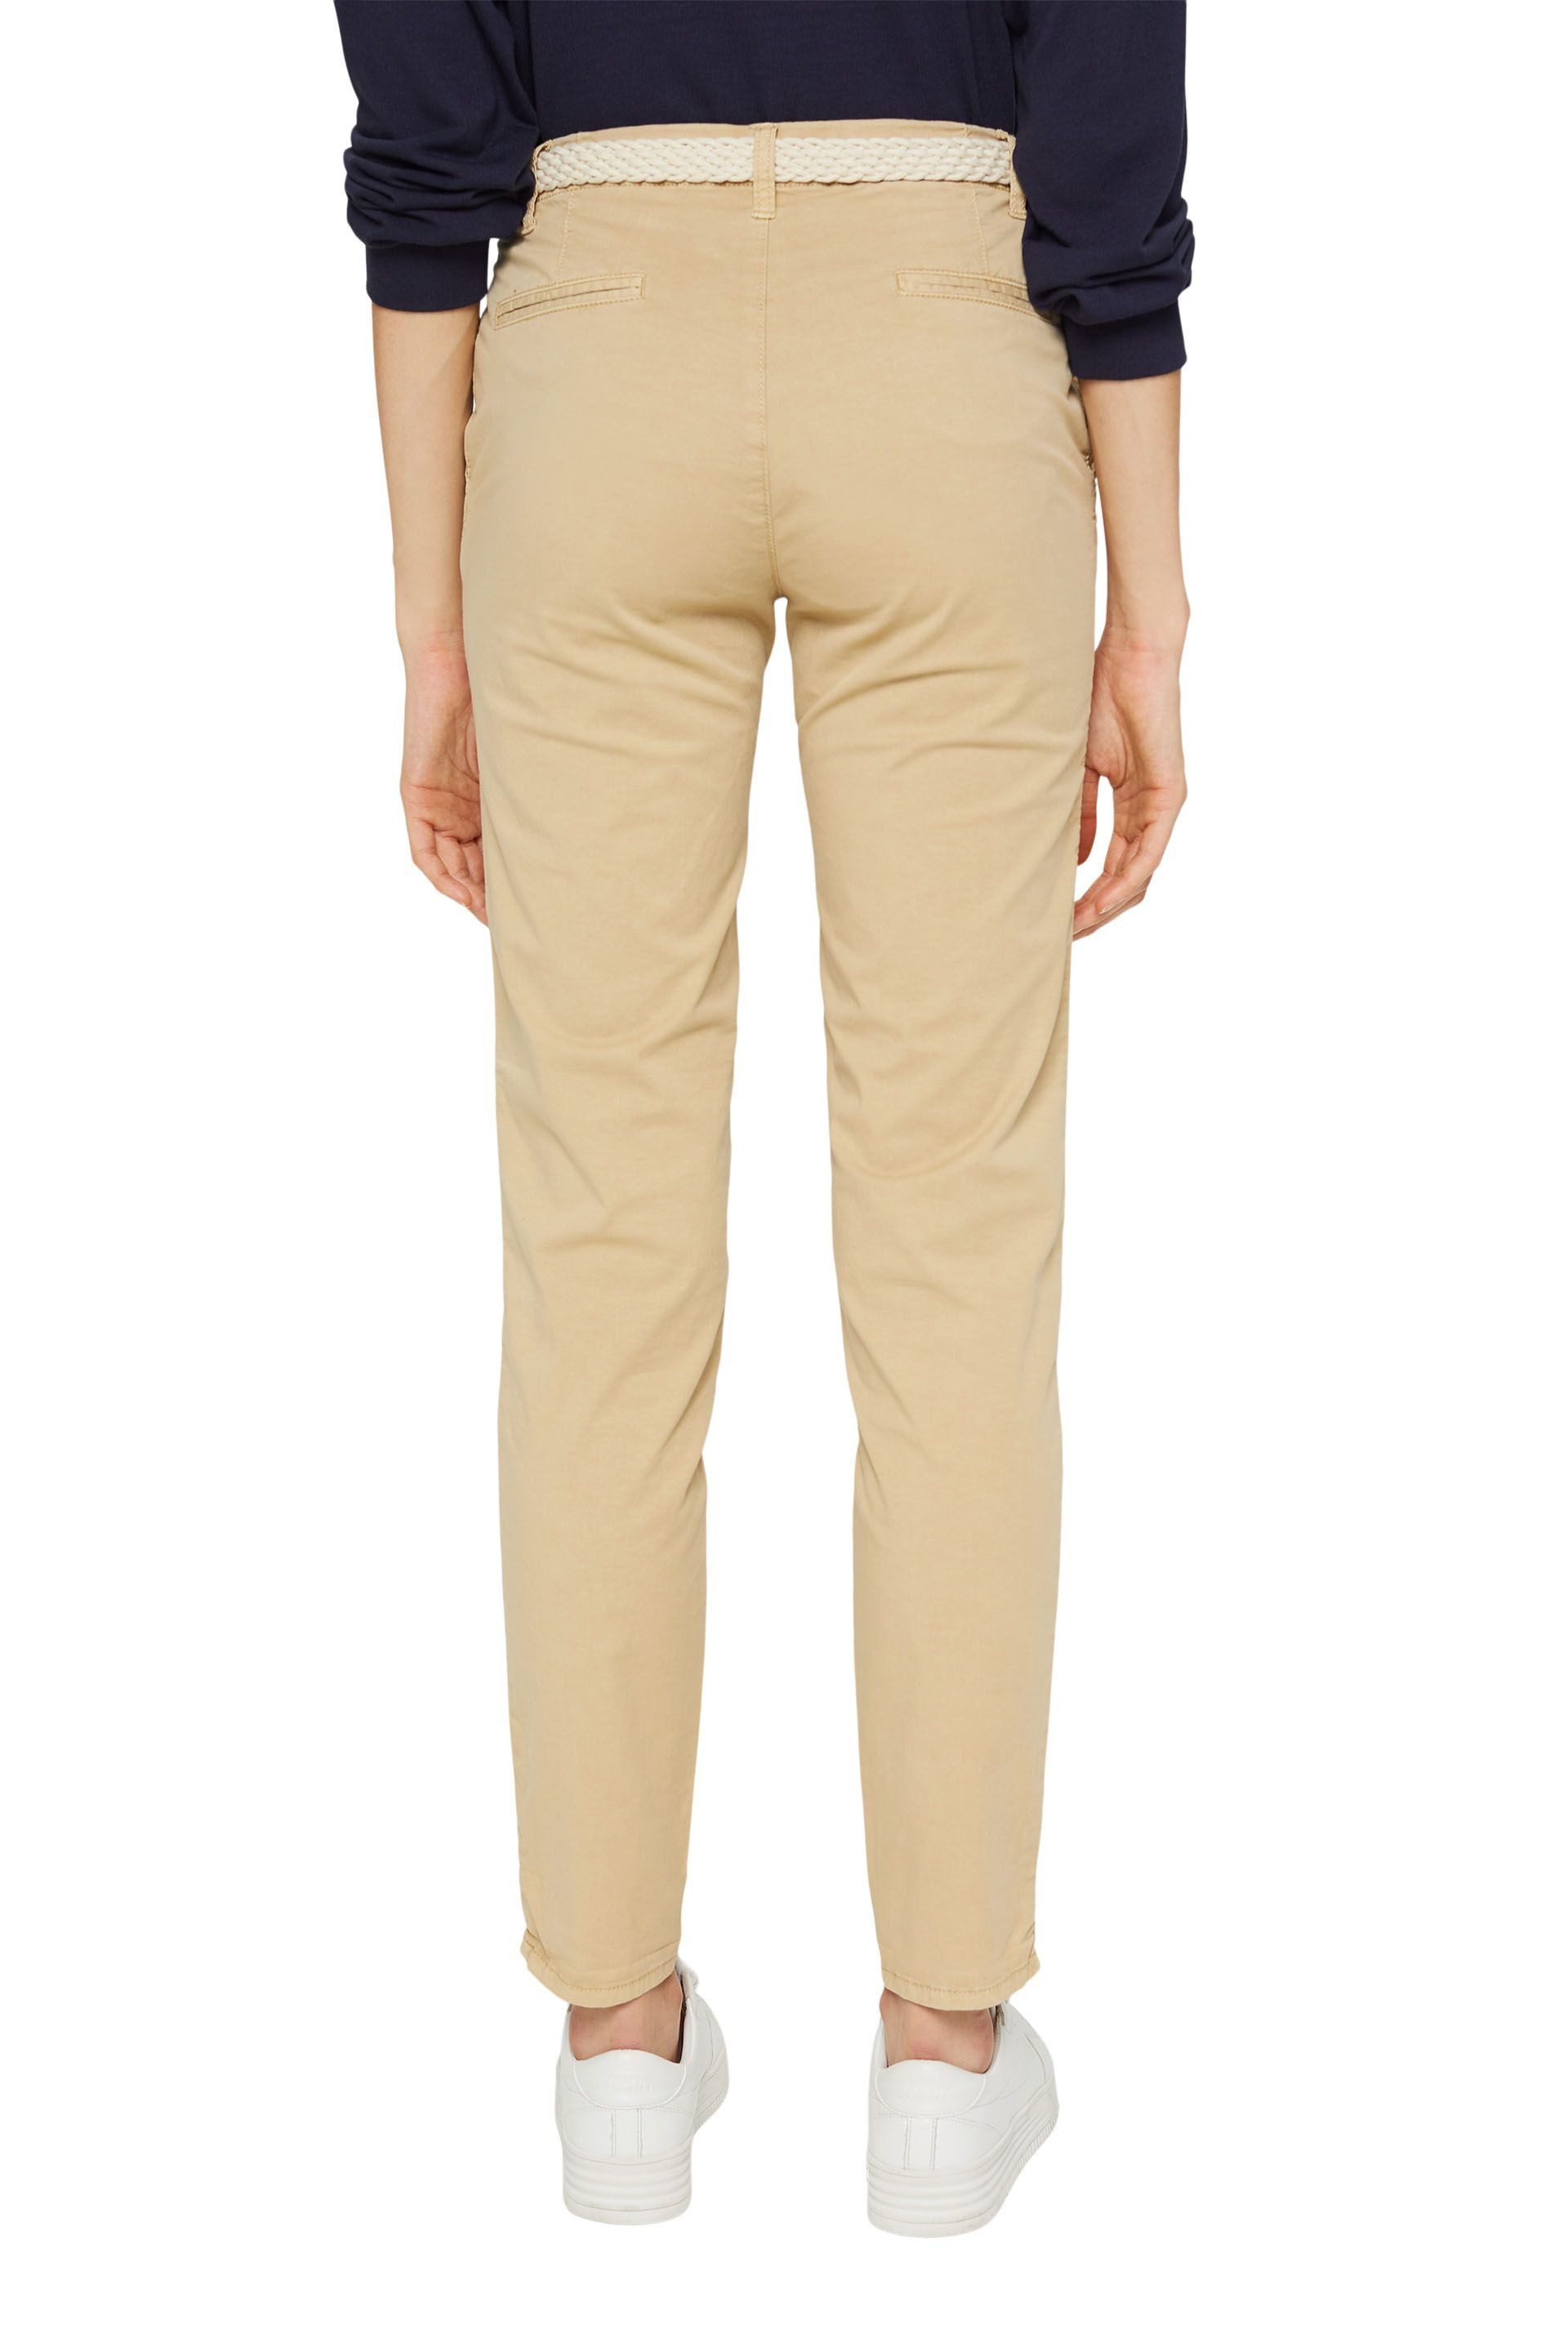 Chino trousers with woven belt, Beige, large image number 2